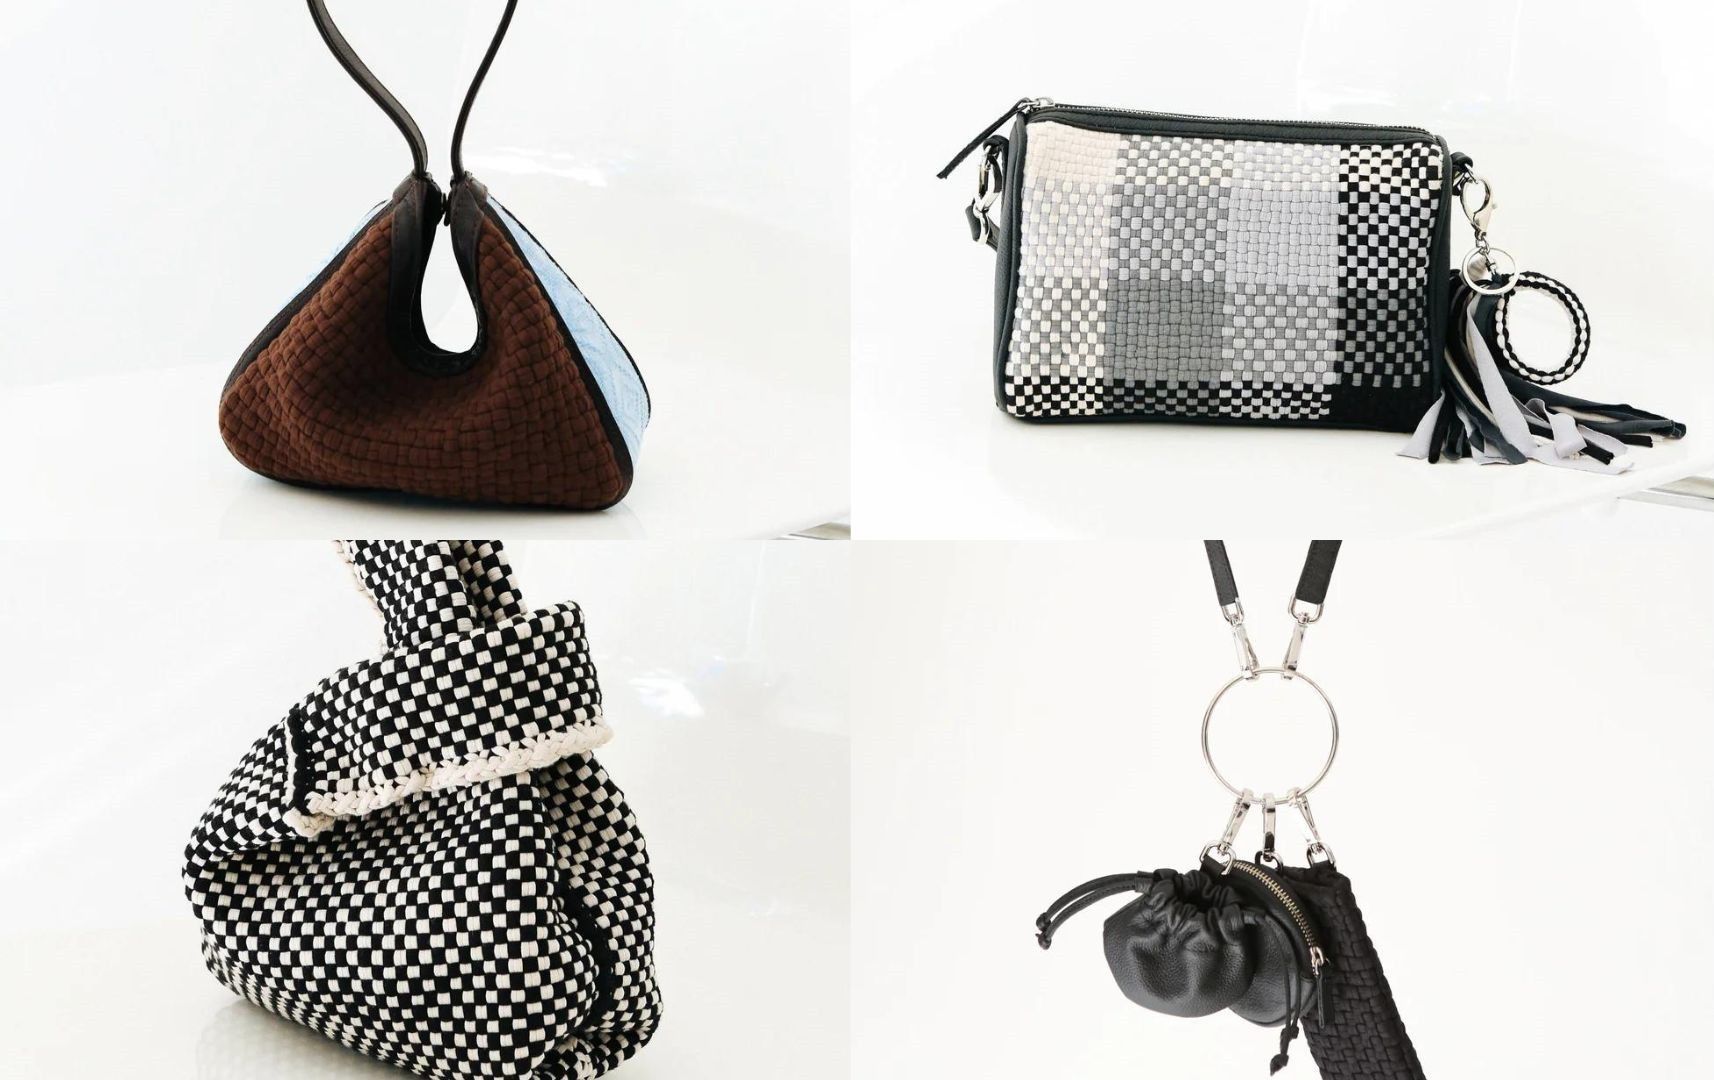 Phone brand teams up with local artisans for recycled bags